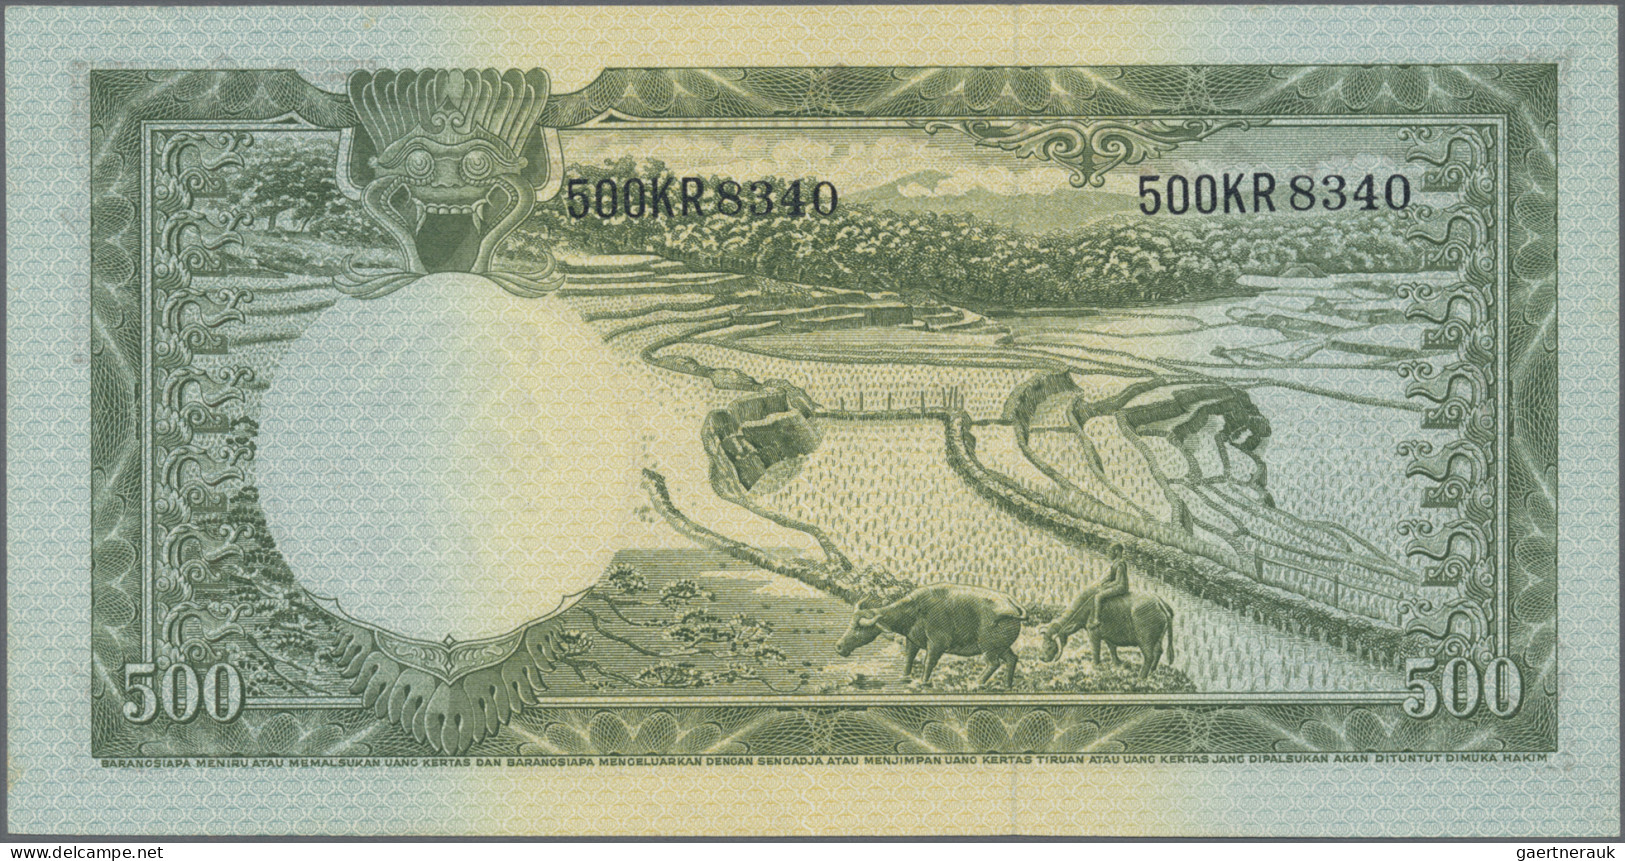 Indonesia: Bank Indonesia, lot with 6 banknotes "Animal Series" 1957, with 5 Rup